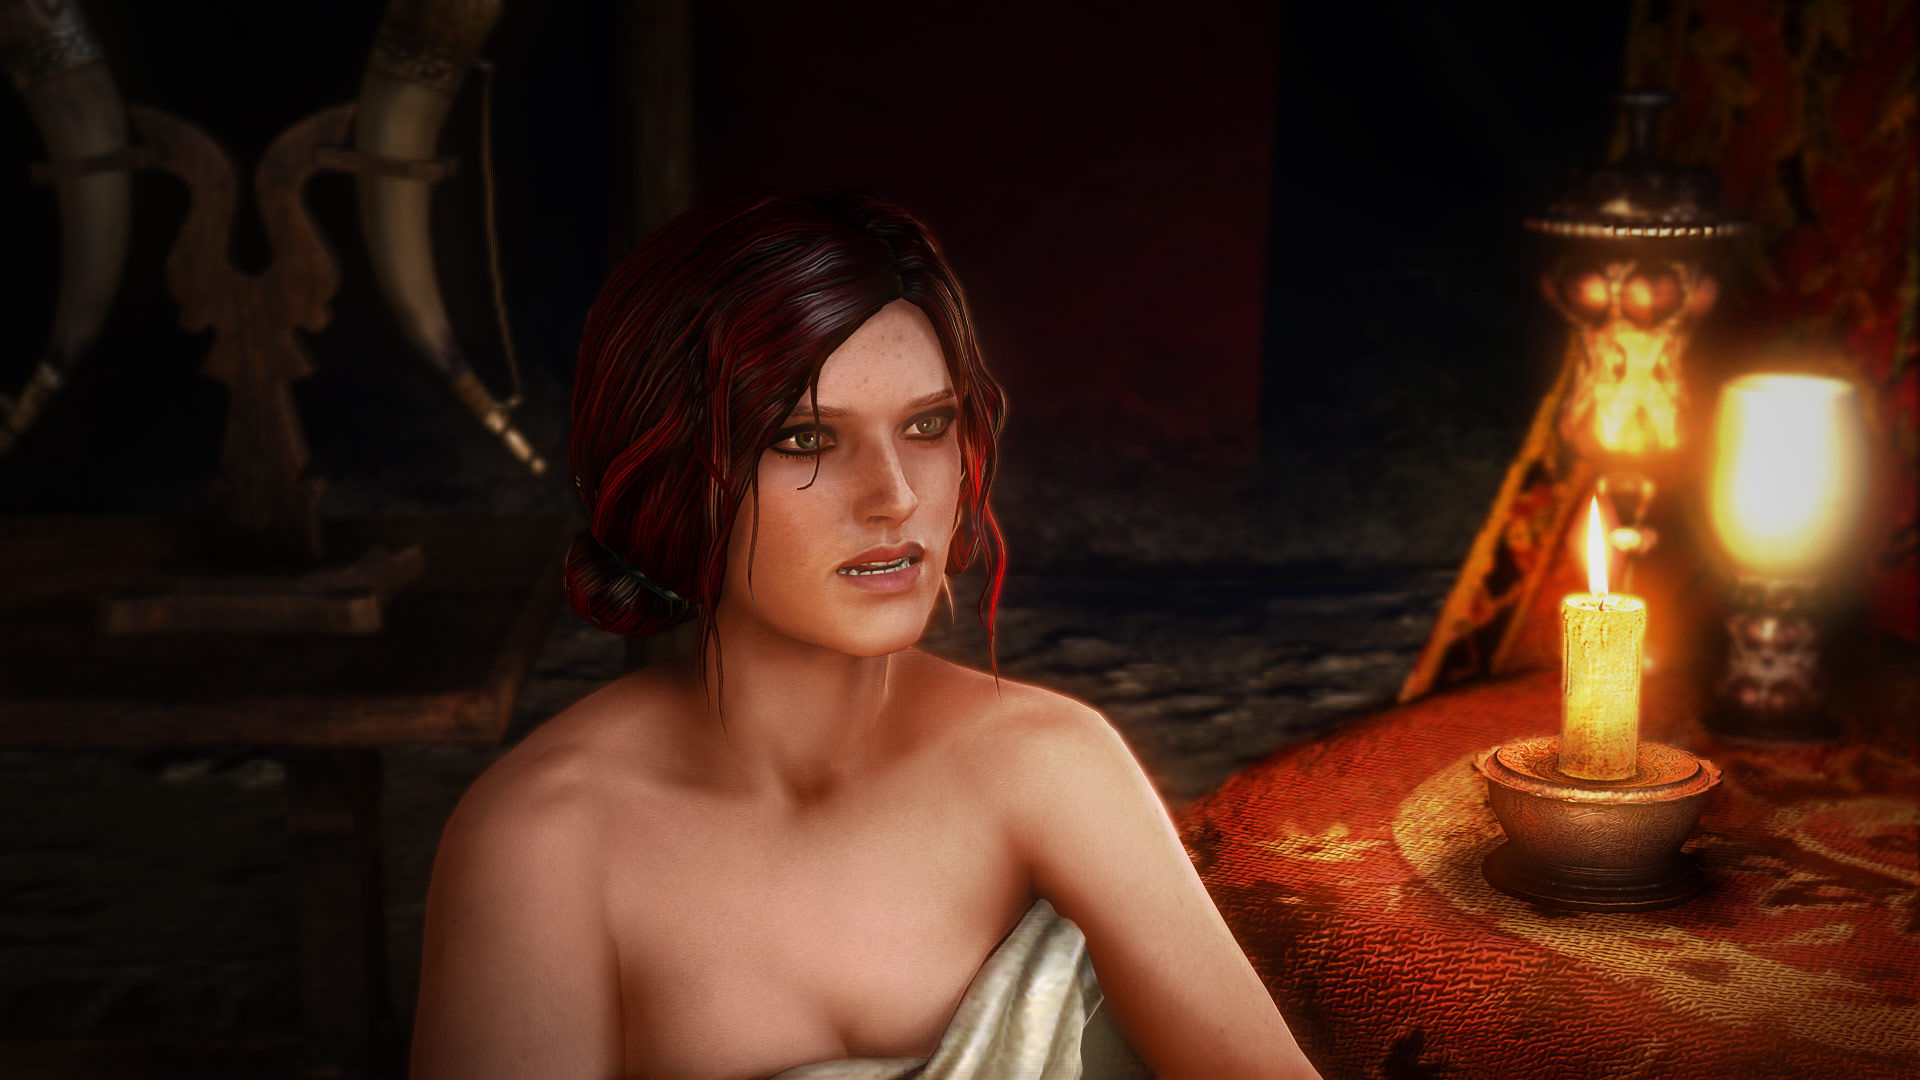 The Witcher 2 Assassins of Kings Enhanced Edition Images 